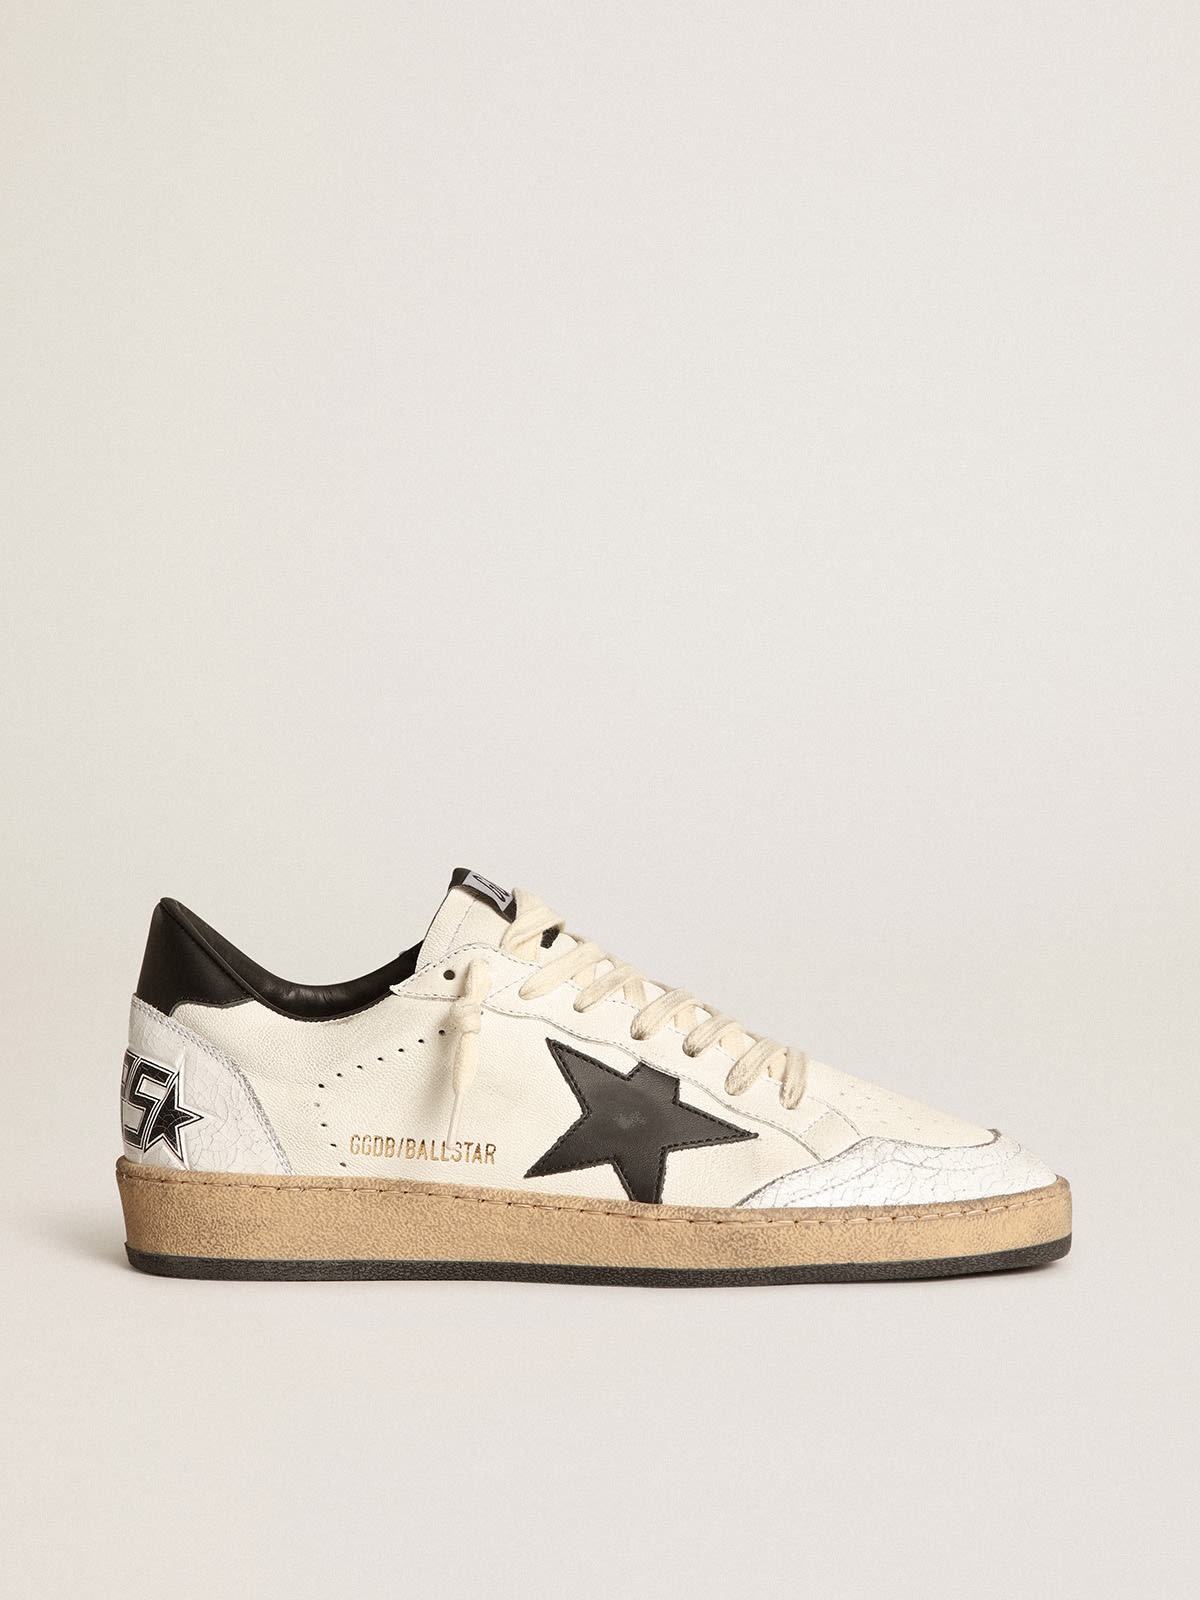 Golden Goose Women's Ball Star sneakers in white nappa leather